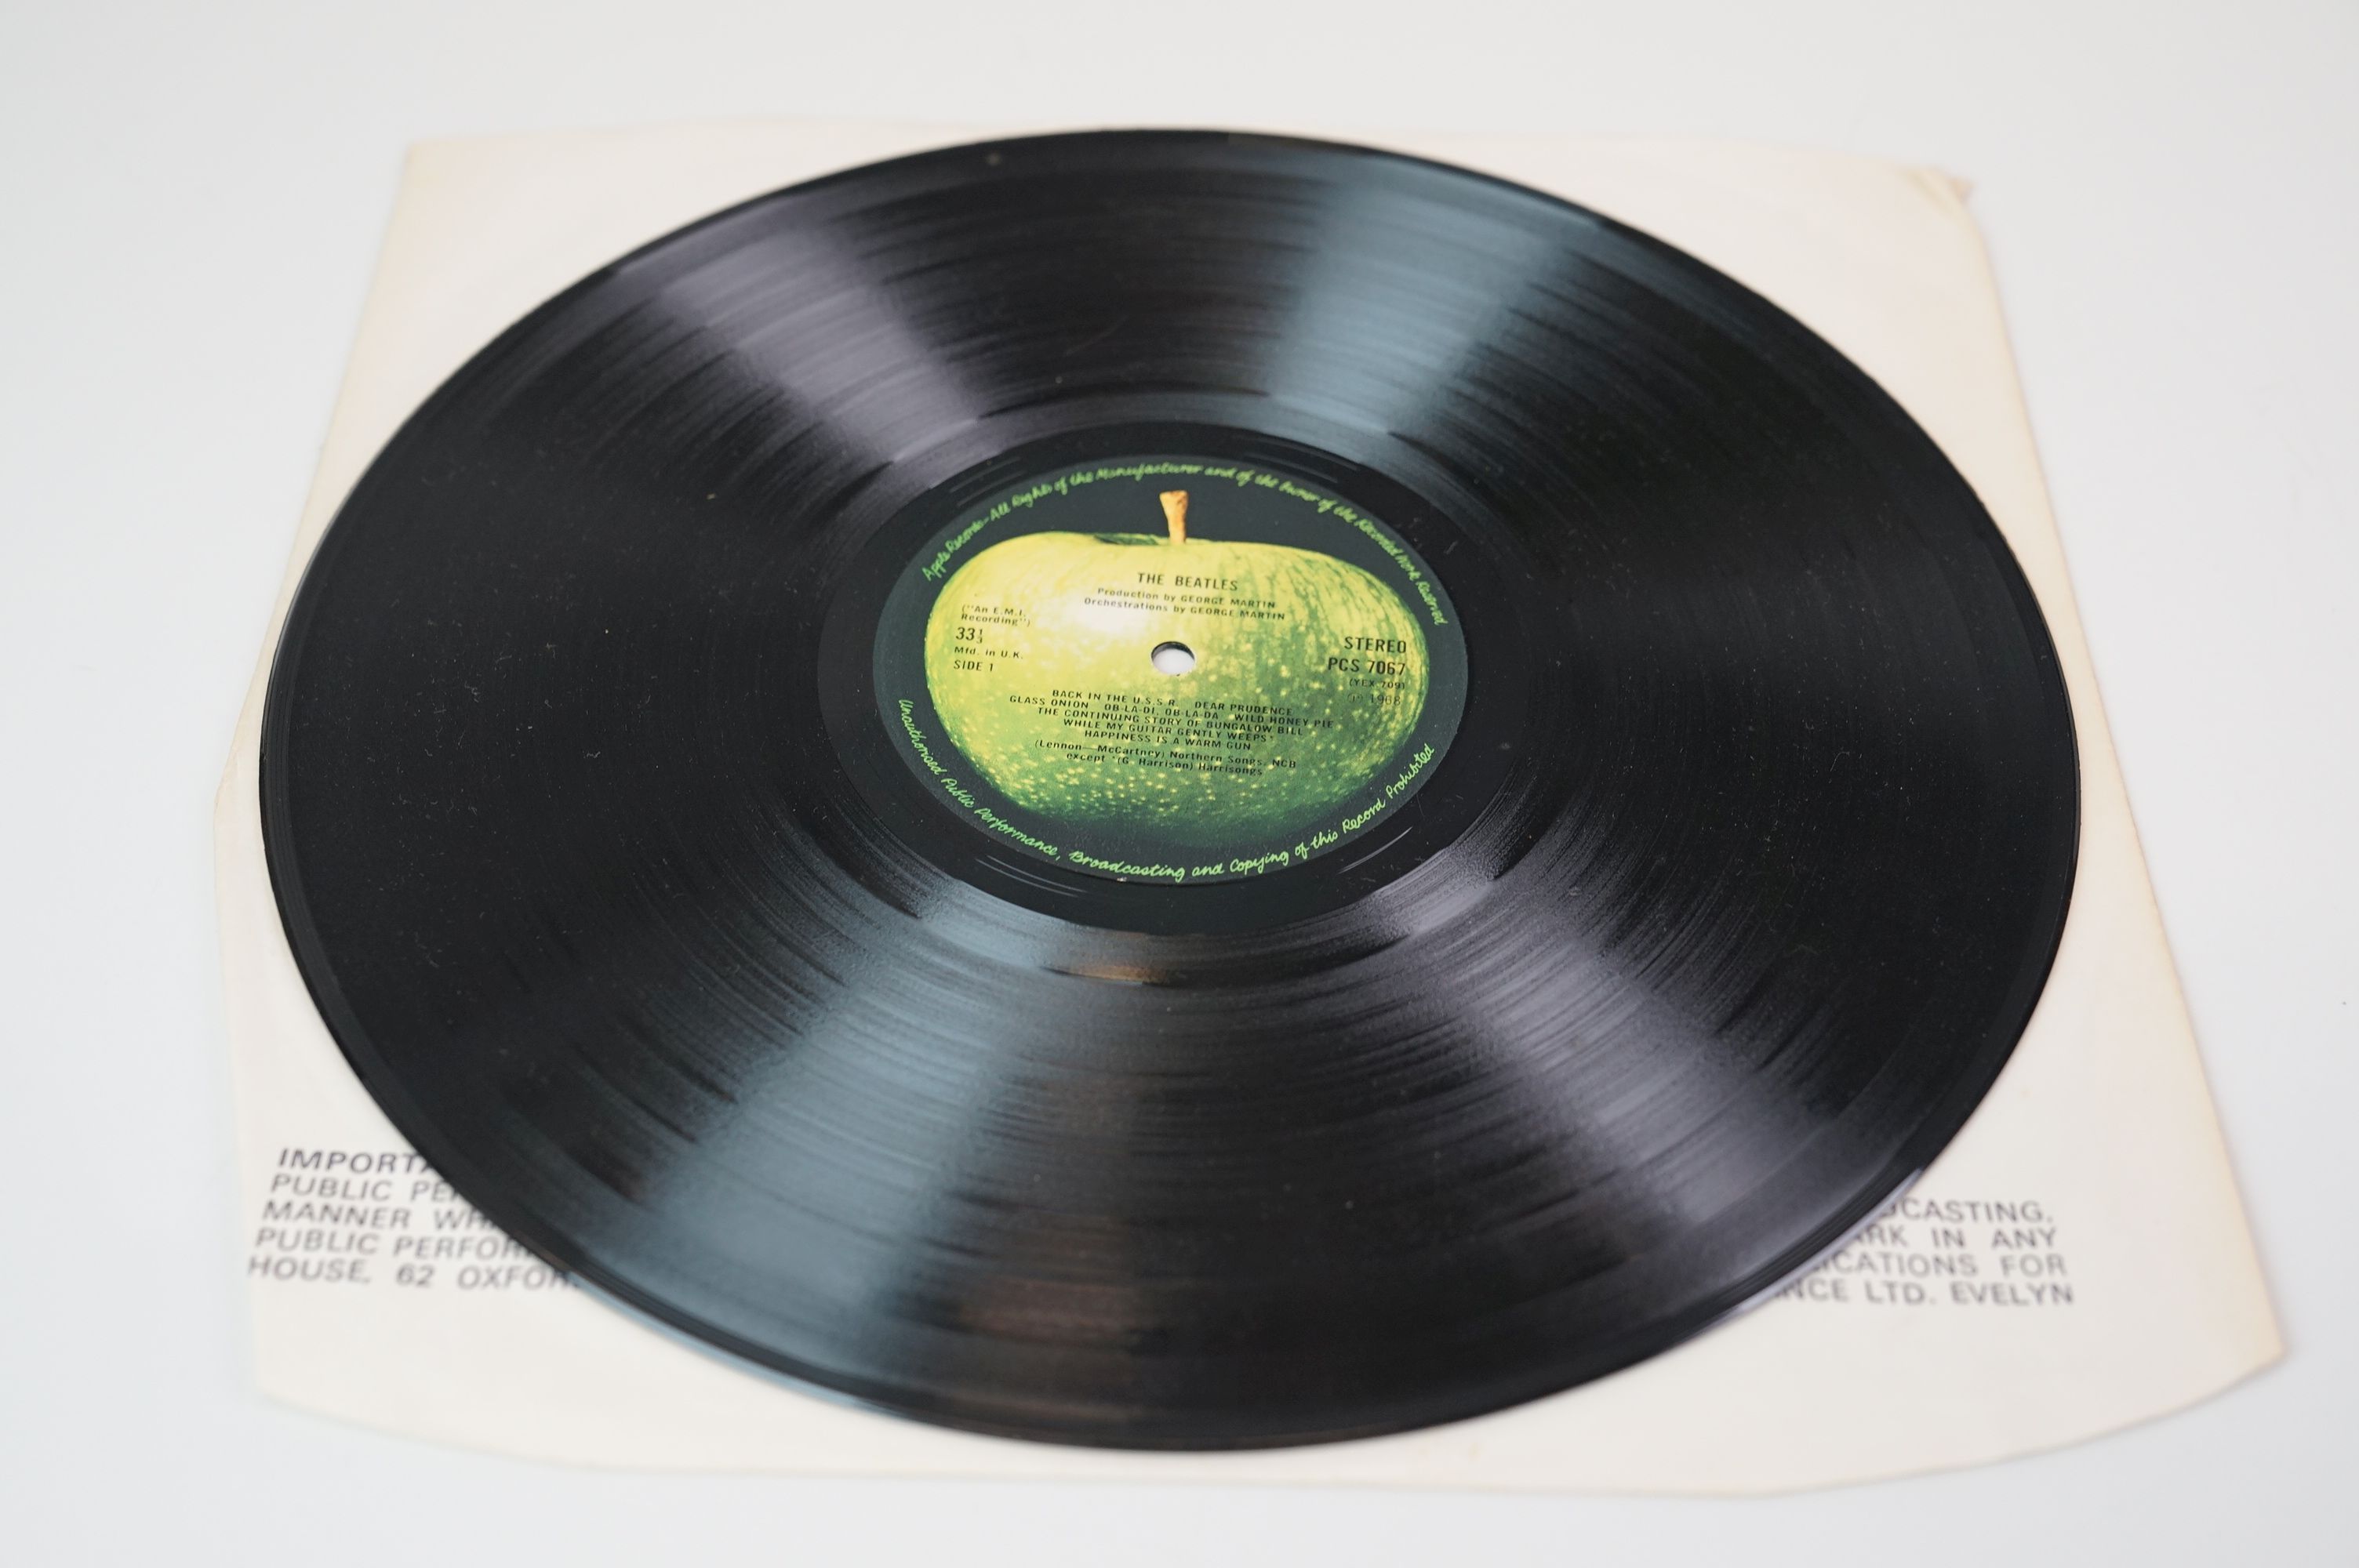 Vinyl - The Beatles White Album PCS7067/8 Stereo side opener no. 296130, 4 photographs and poster ex - Image 11 of 17